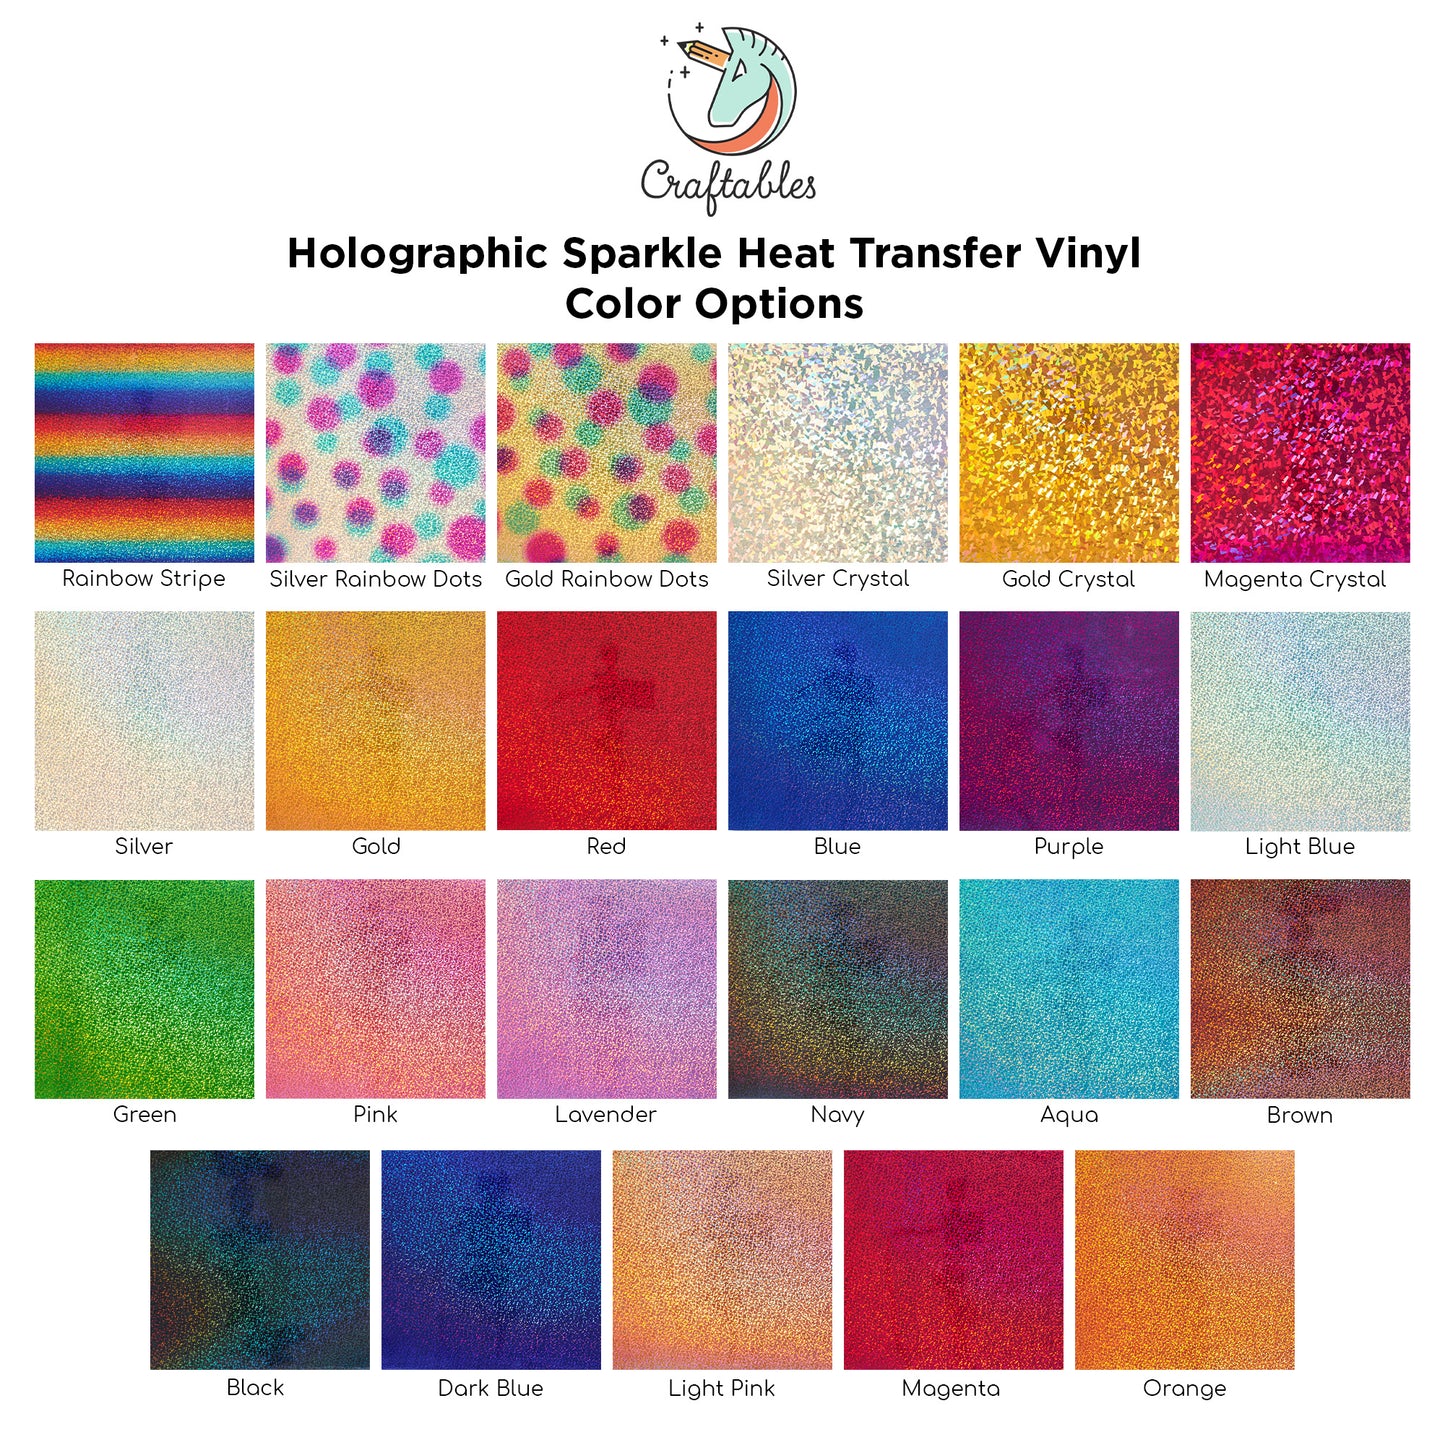 Gold Multi Holographic Sparkle Heat Transfer Vinyl Sheets By Craftables